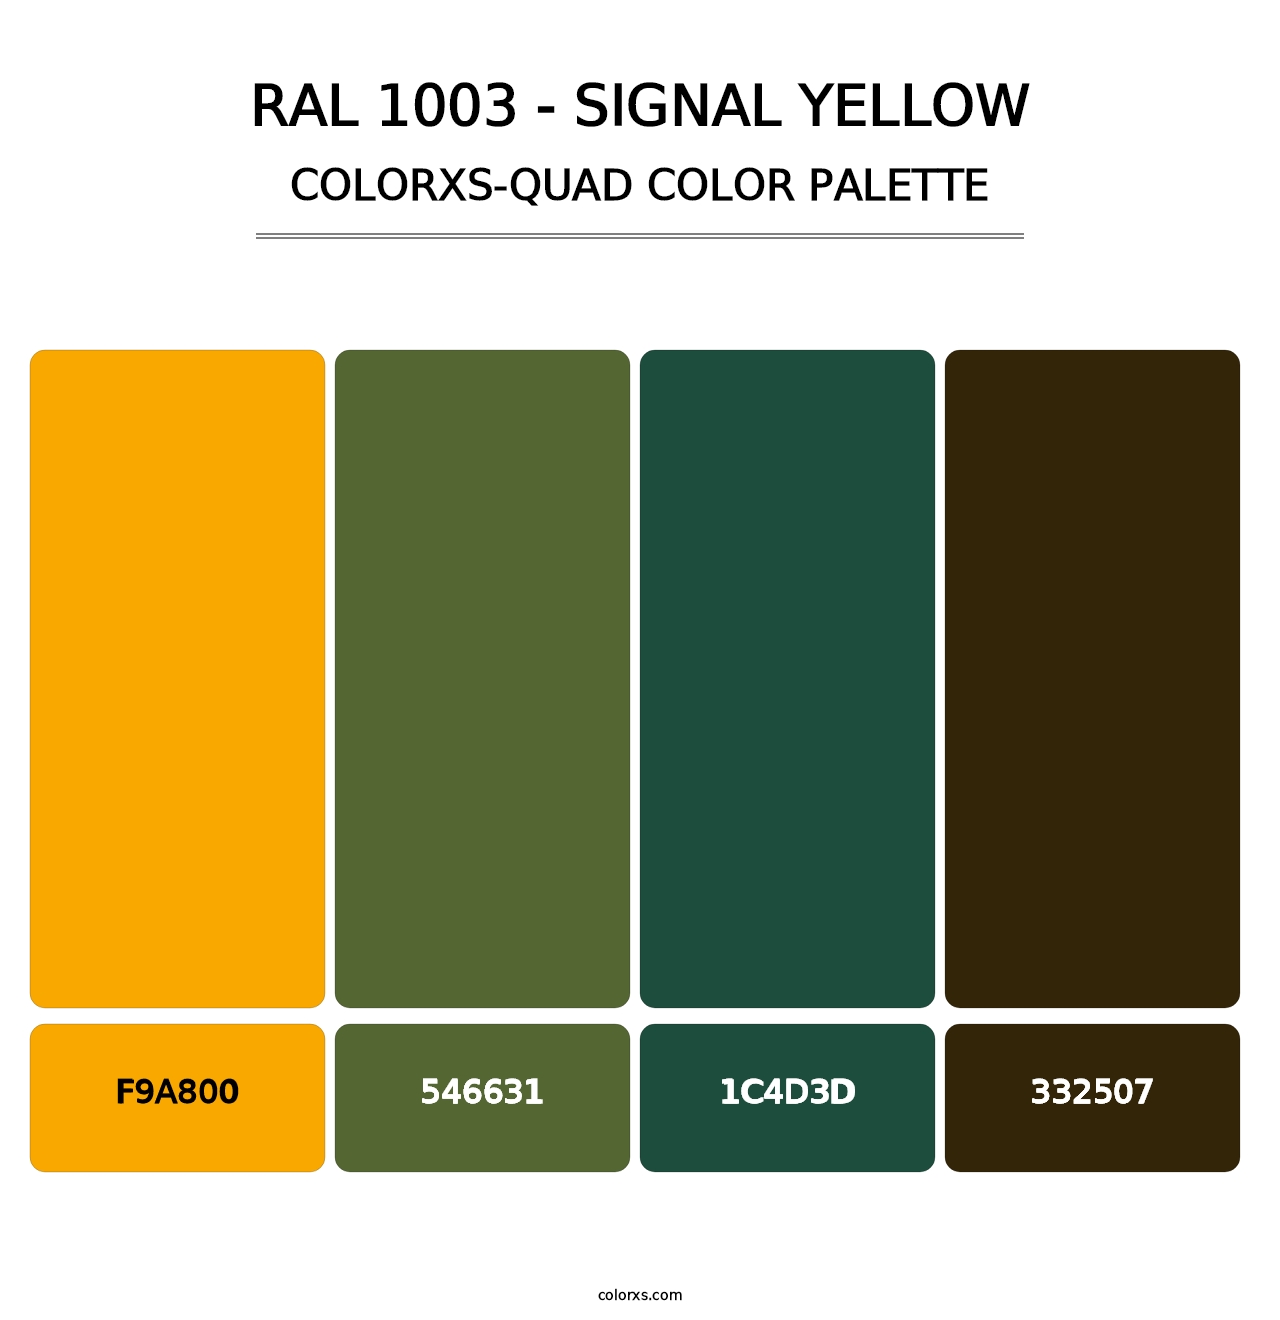 RAL 1003 - Signal Yellow - Colorxs Quad Palette